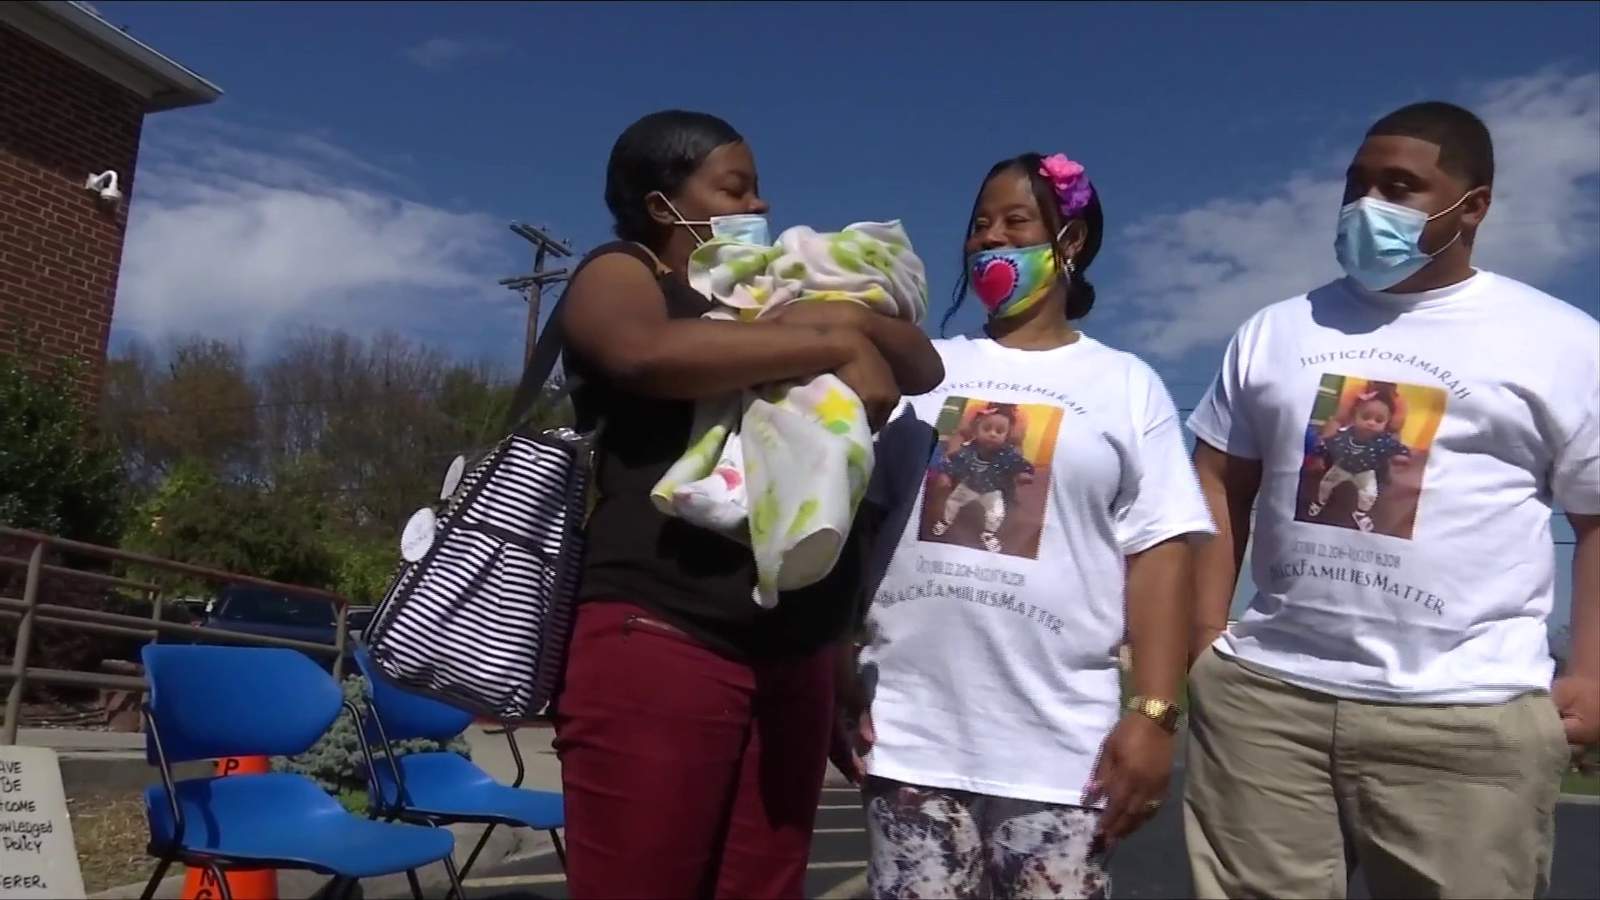 Family who lost infant to child abuse gives diaper bags to low-income parents in Roanoke